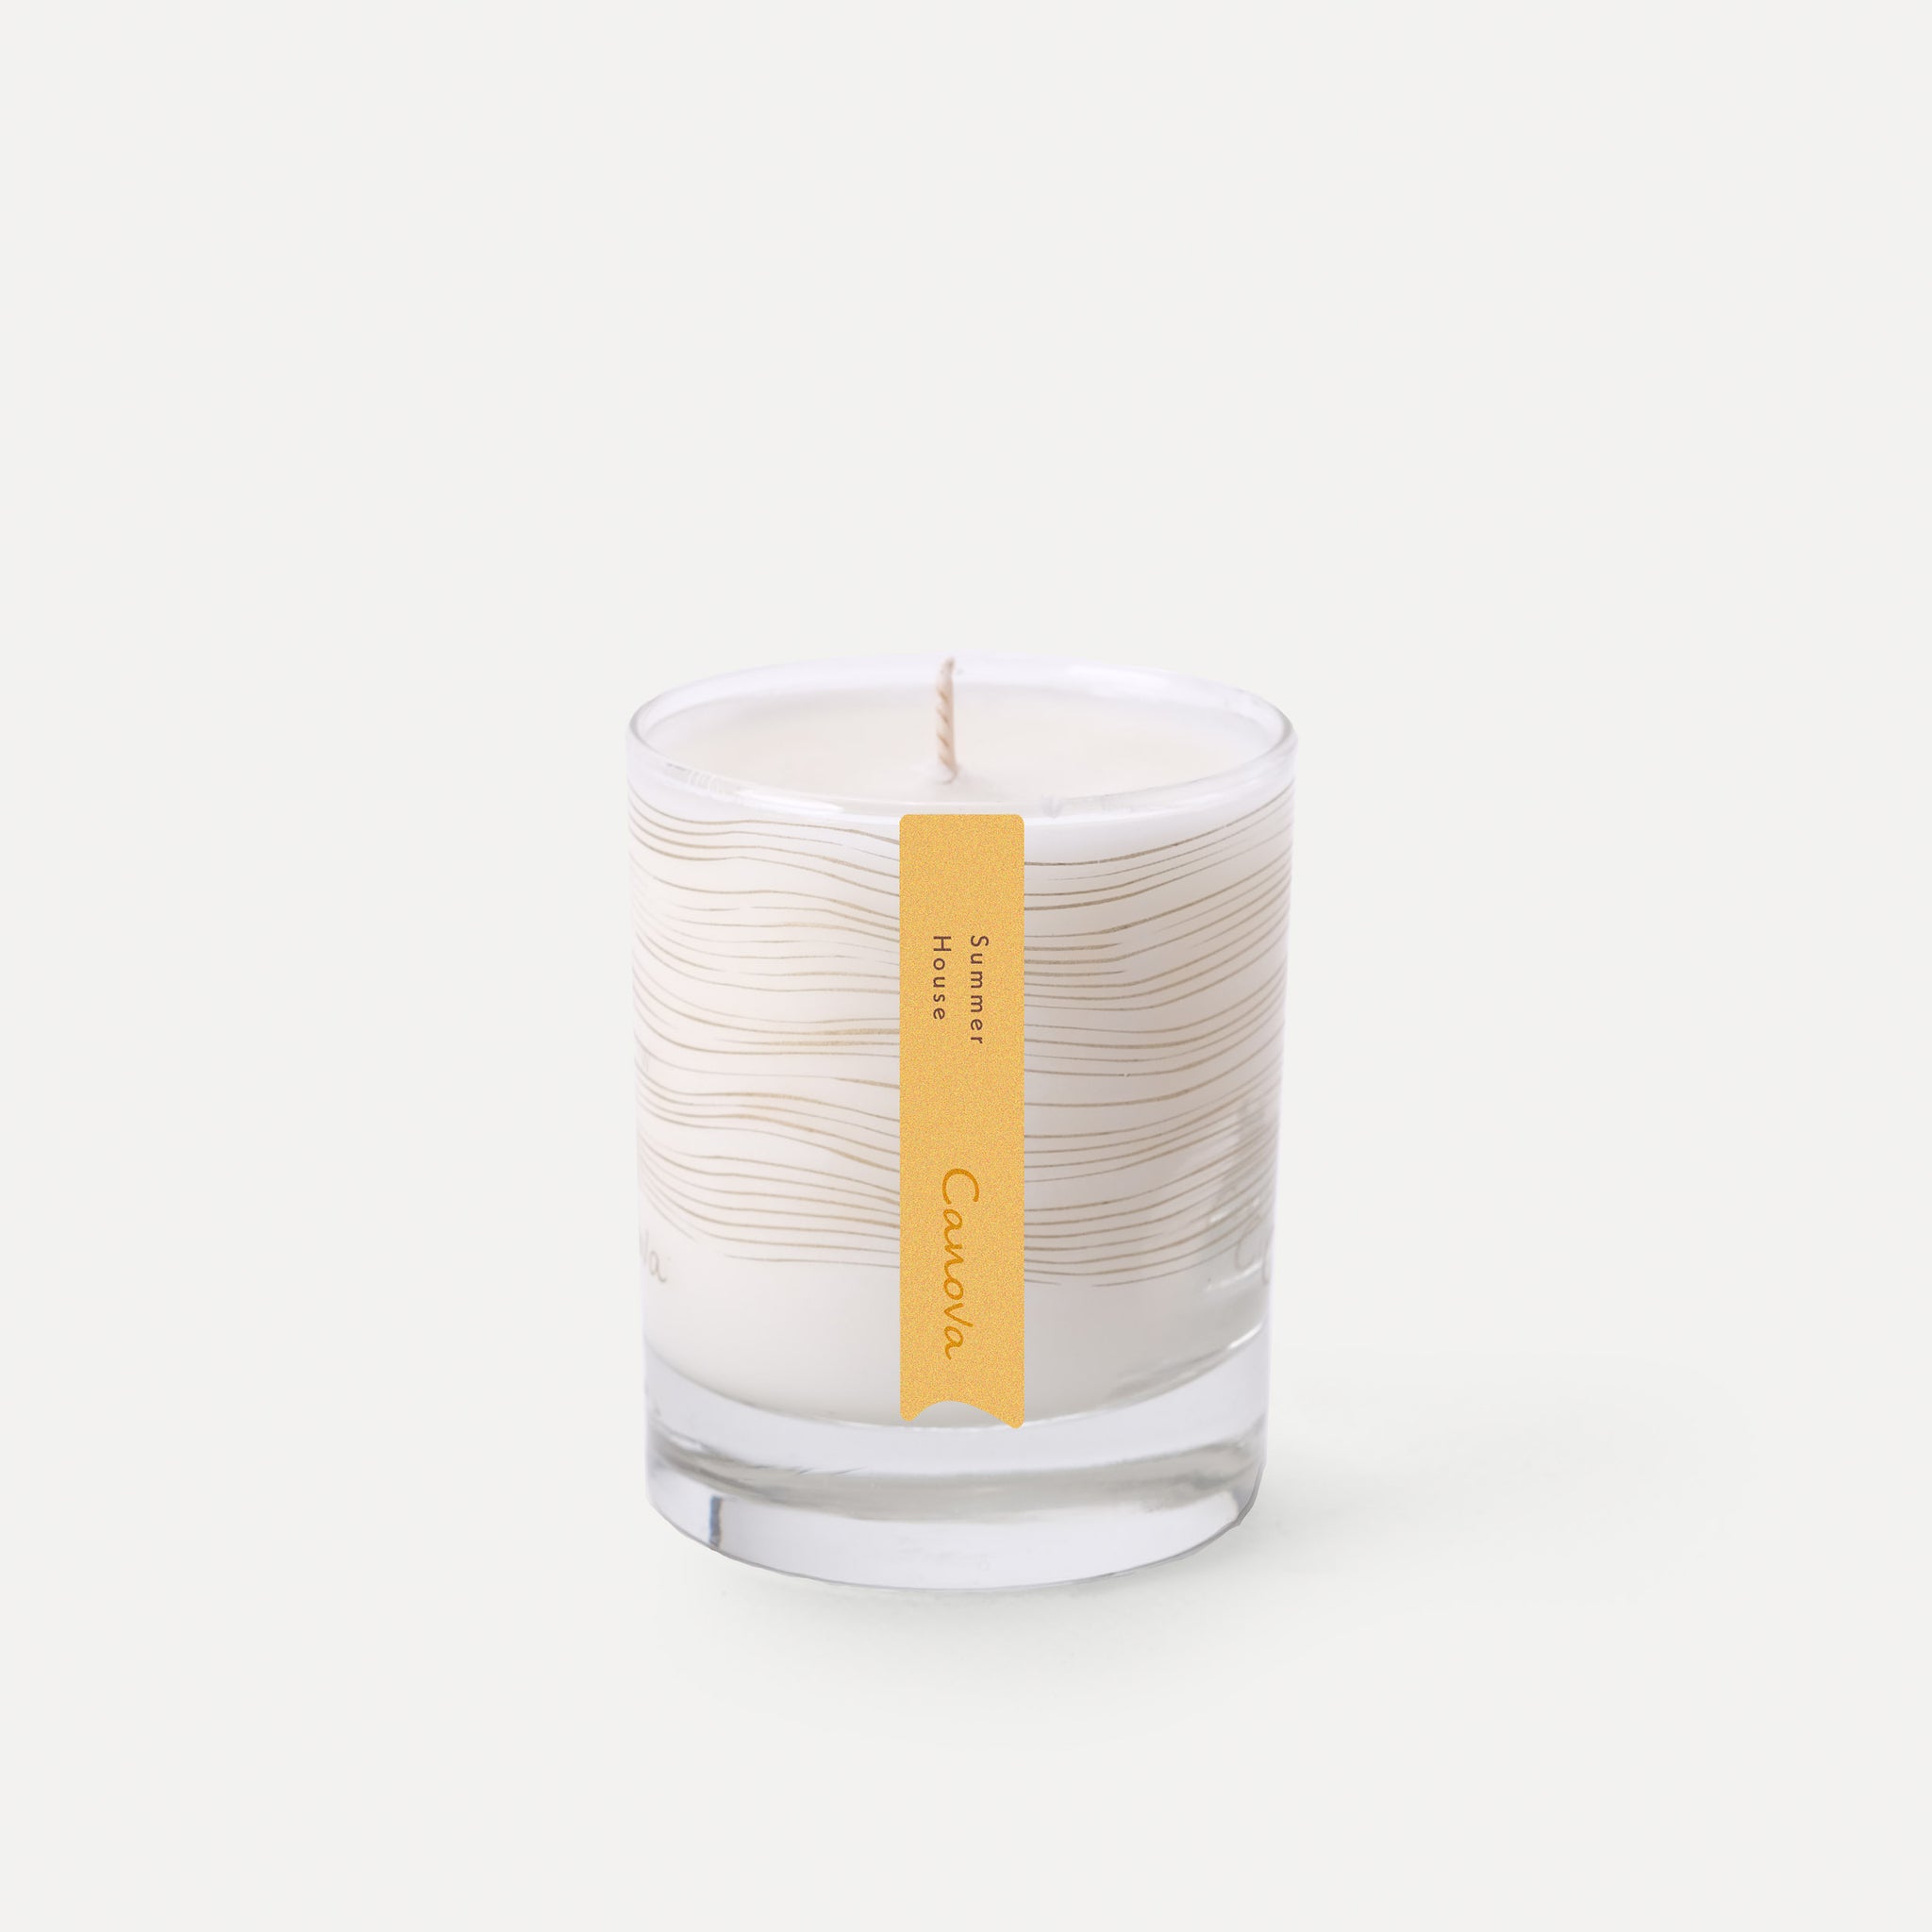 170g Signature - Summer House Candle